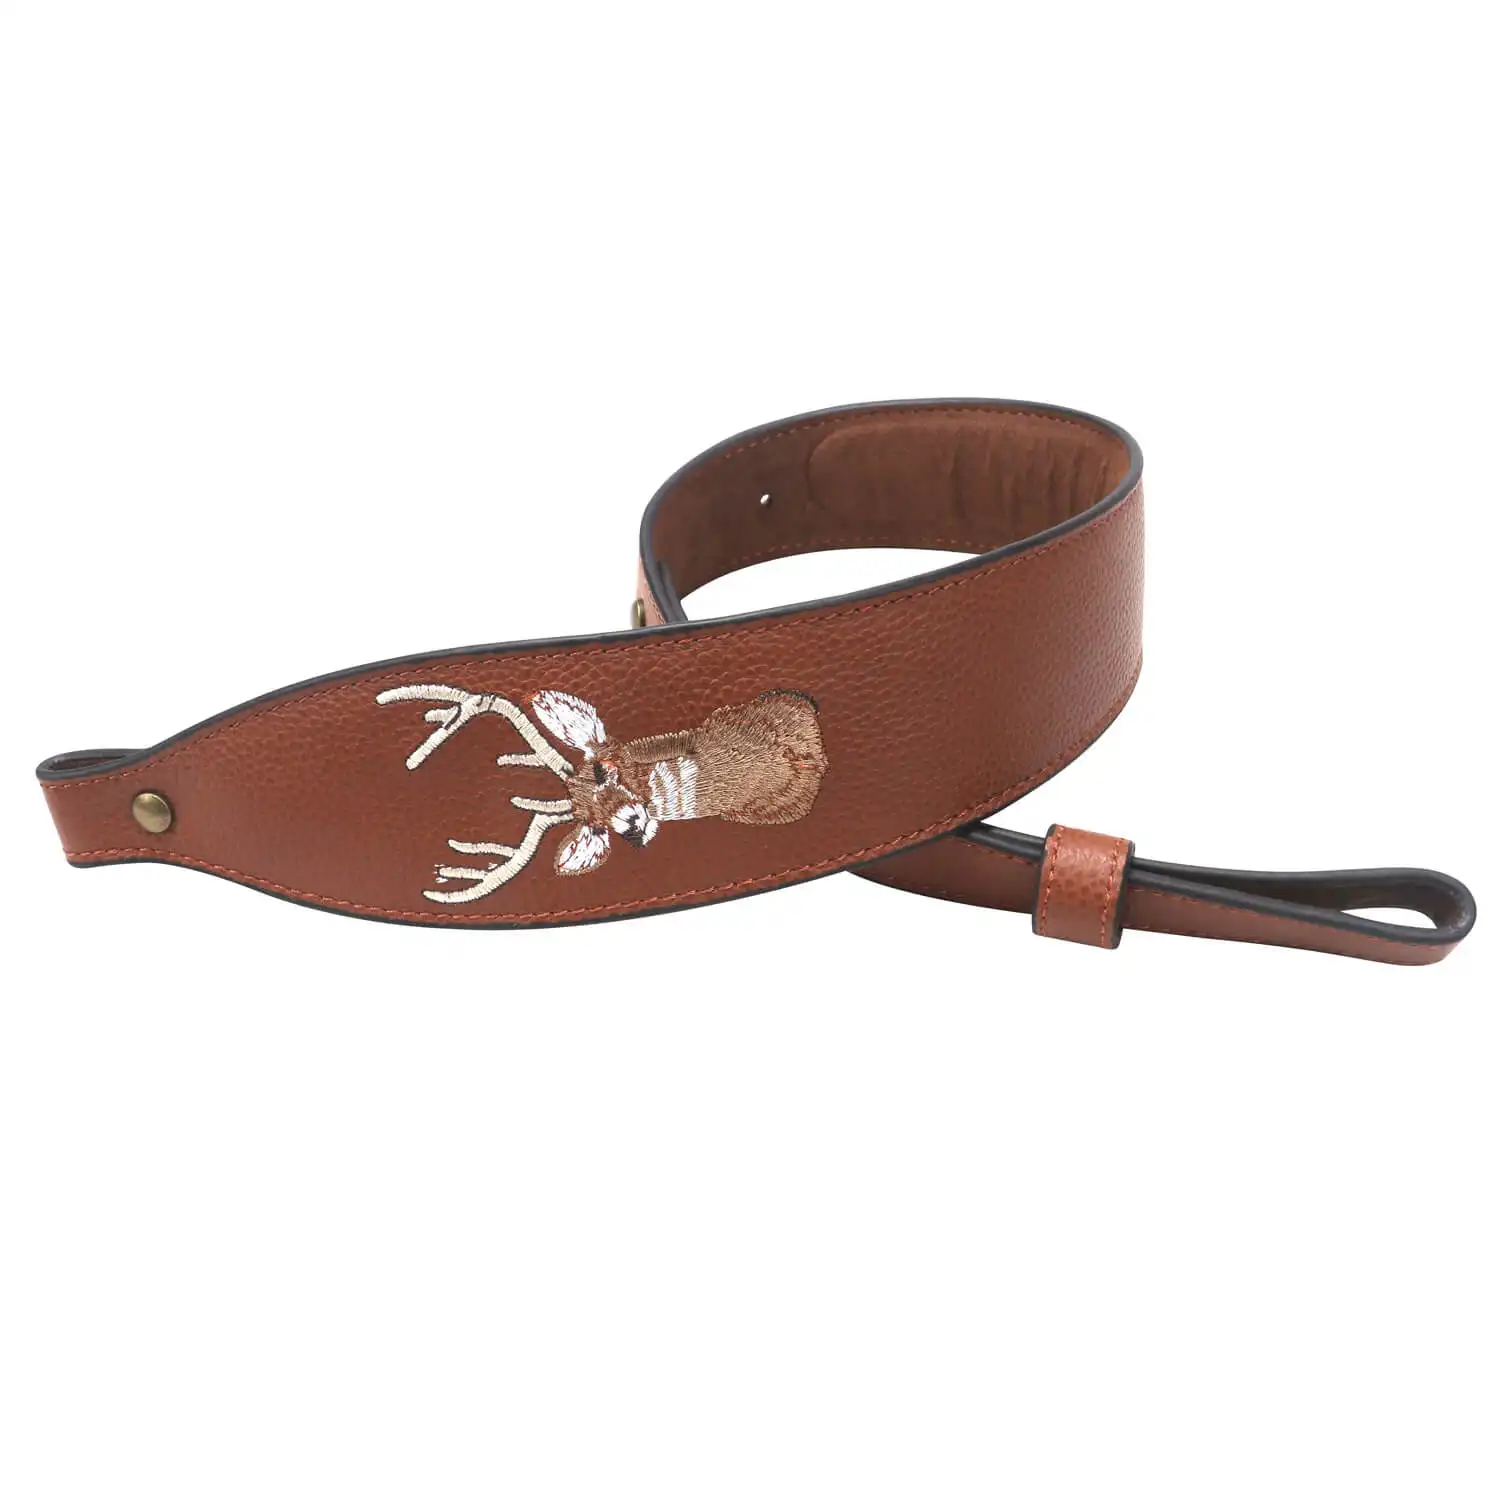 HIBO Tourbon Genuine Leather Gun Sling With embroidery deer High quality shoulder strap holster